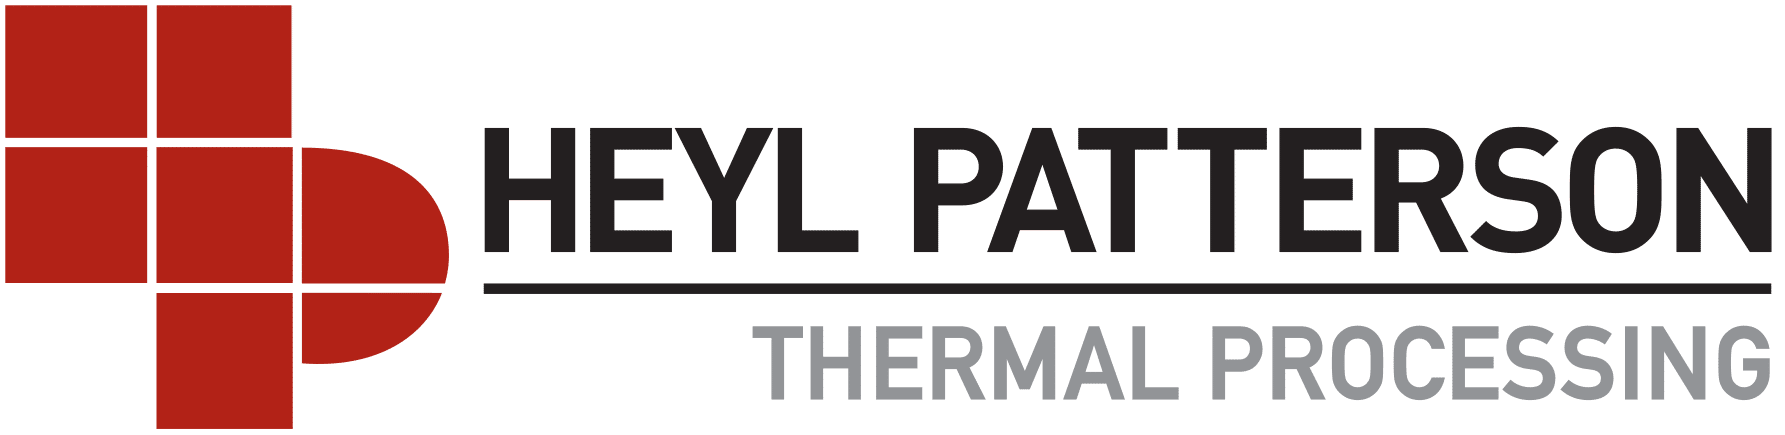 Heyl Patterson - Thermal Processing logo